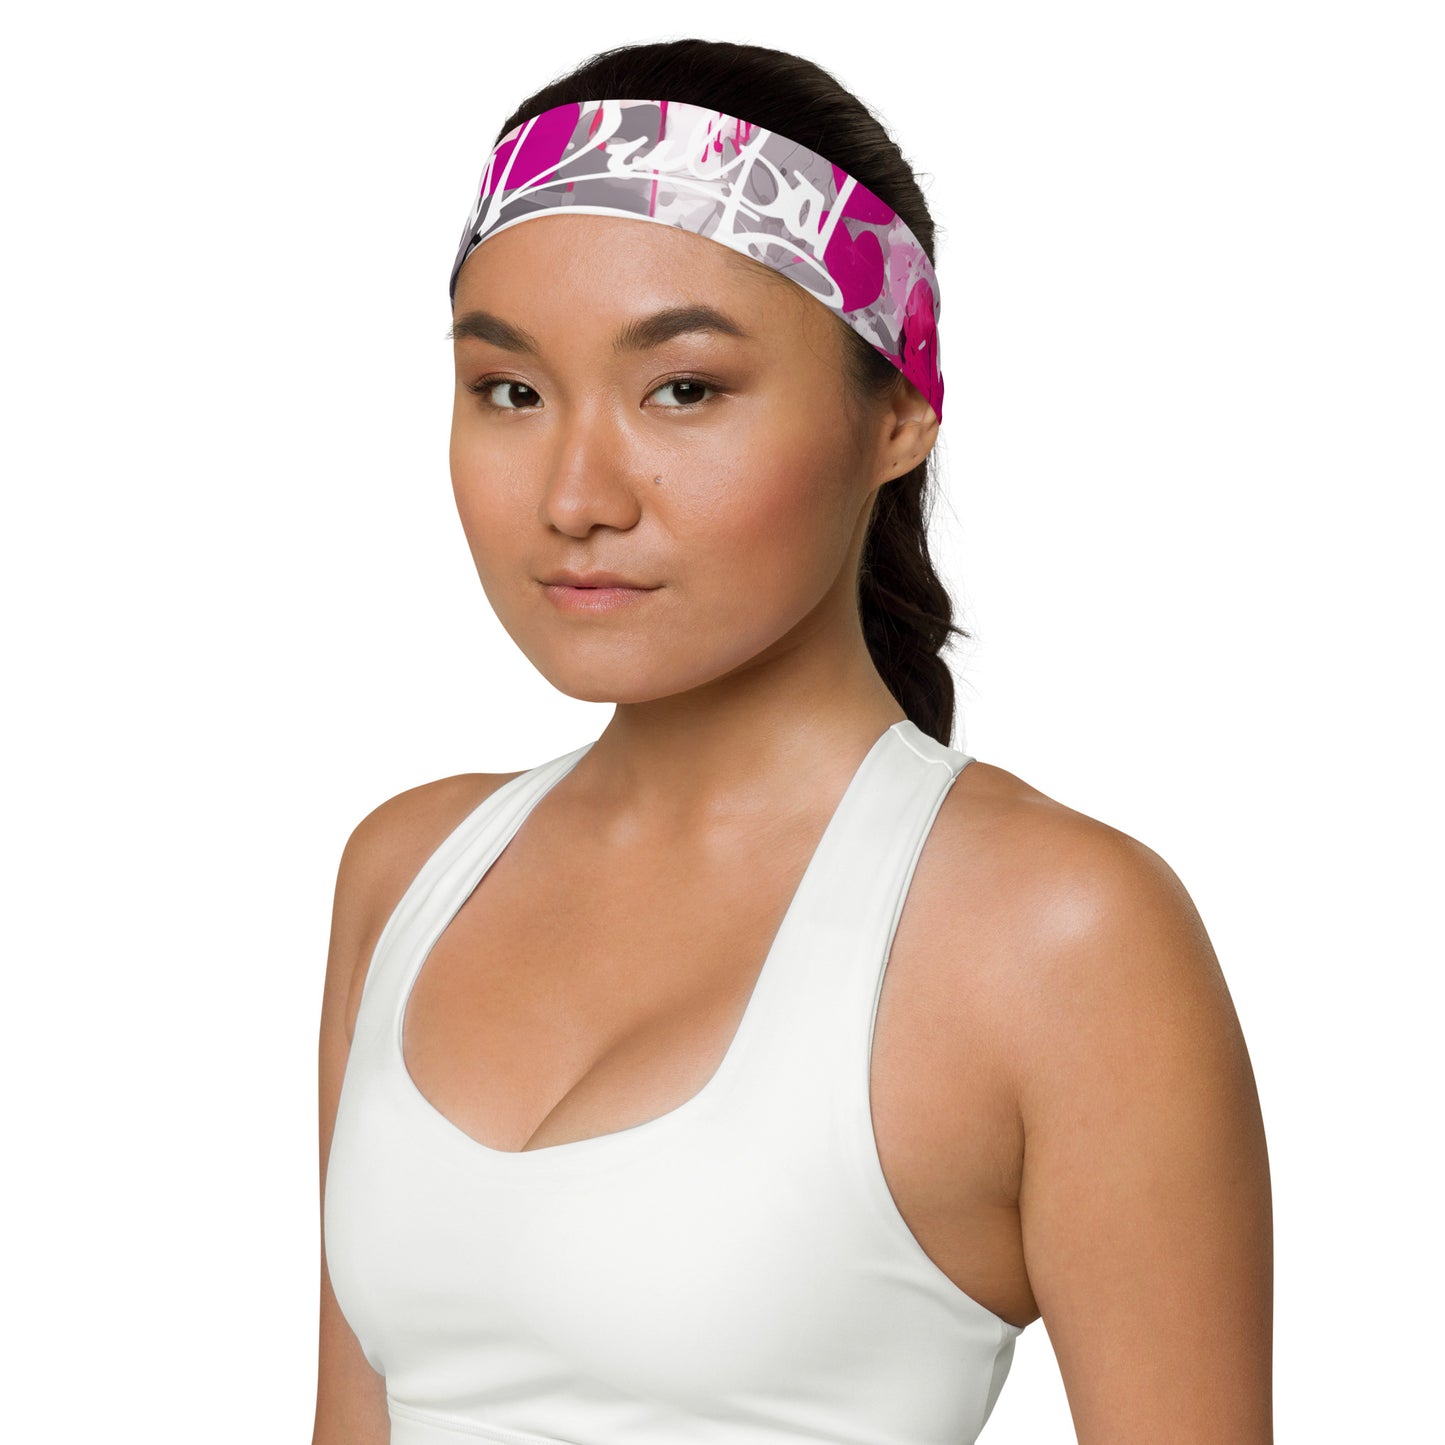 Inspired with Love:  Crafted with love, the MeaKulpa Headband is more than just an accessory—it's a reflection of a brand dedicated to blending comfort, style, and inspiration in every stitch.